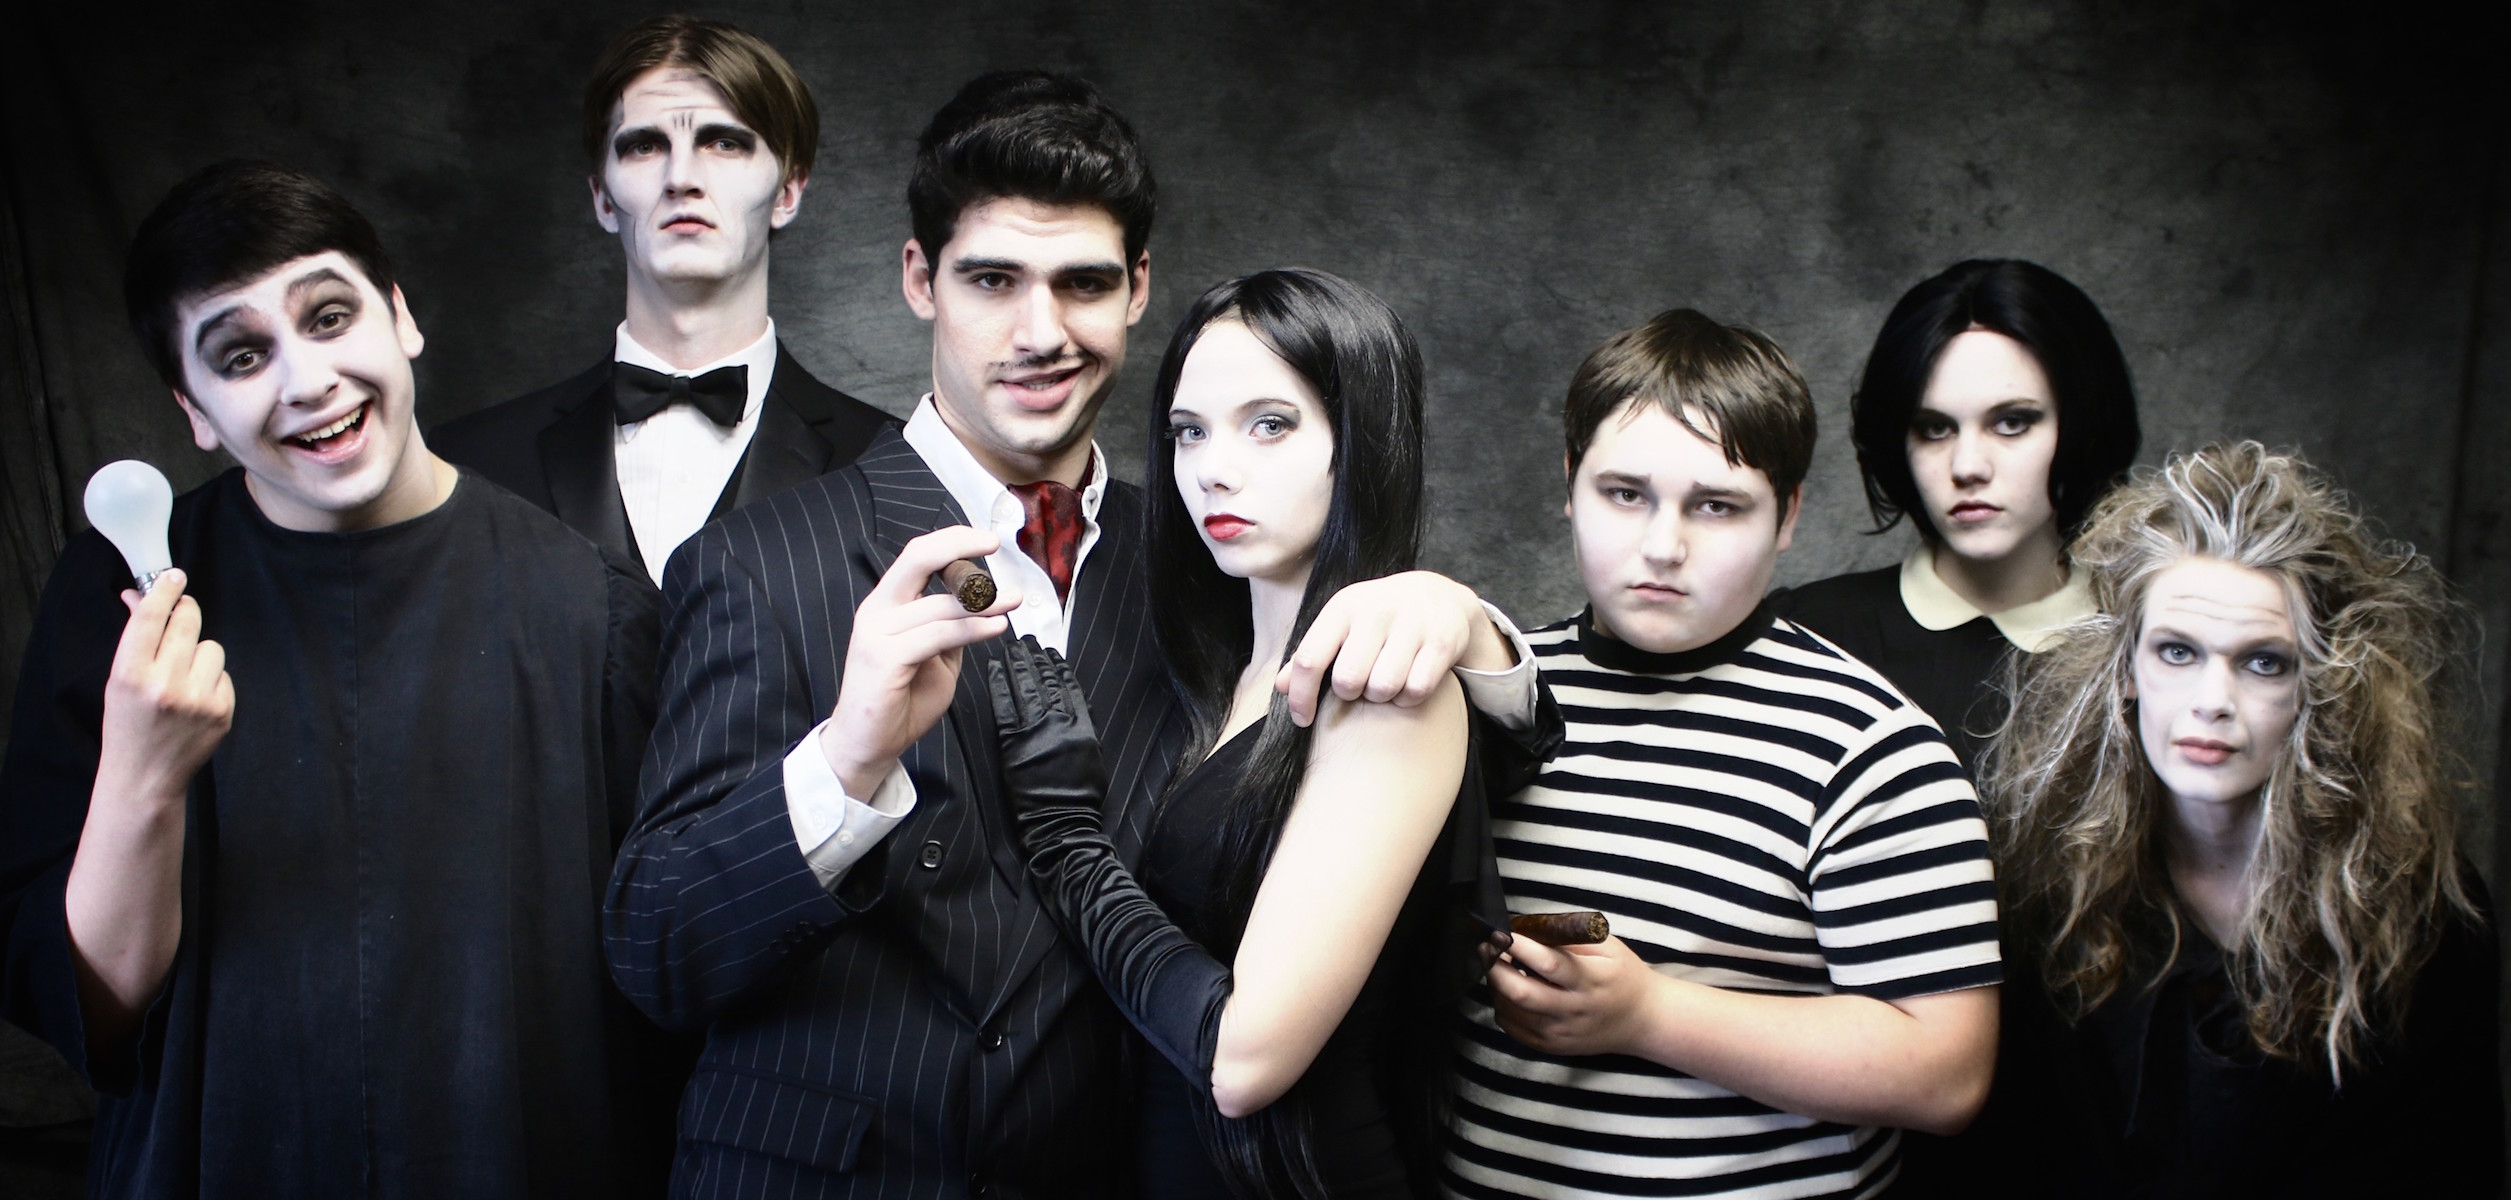 2511x1200 The Addams Family #7